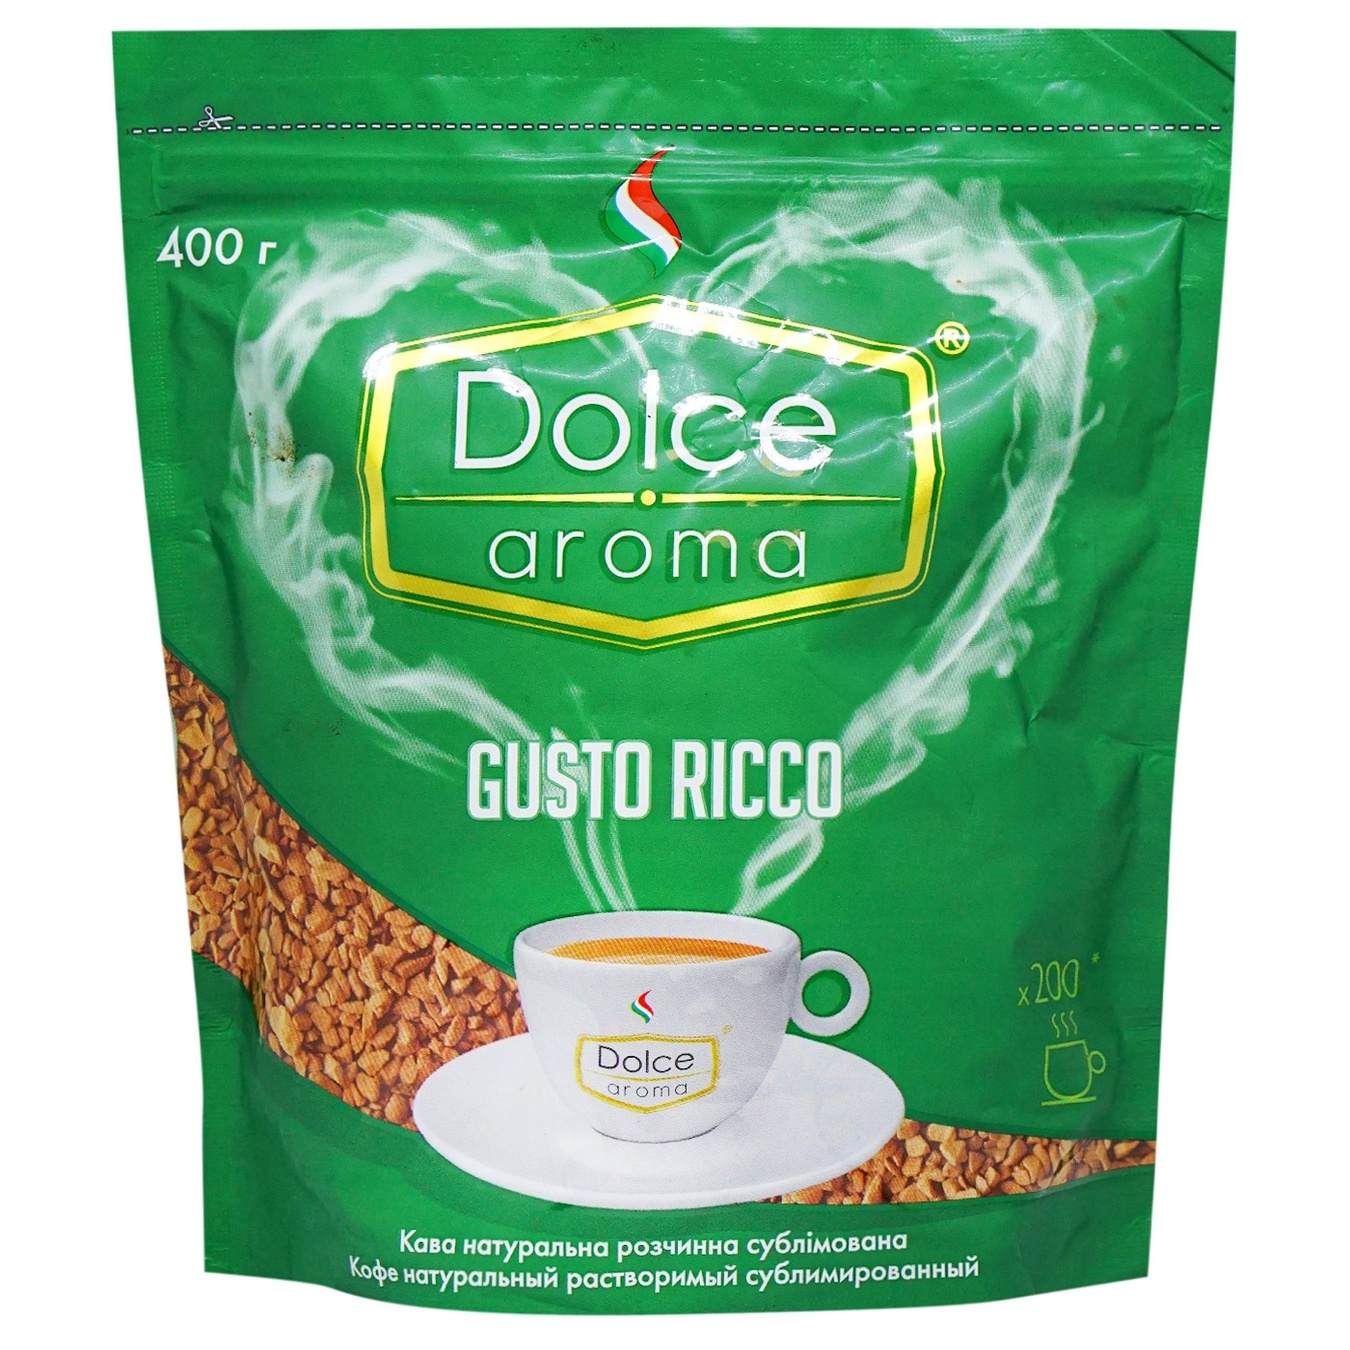 Dolce Aroma Gusto Ricco natural soluble sublimated coffee 400g